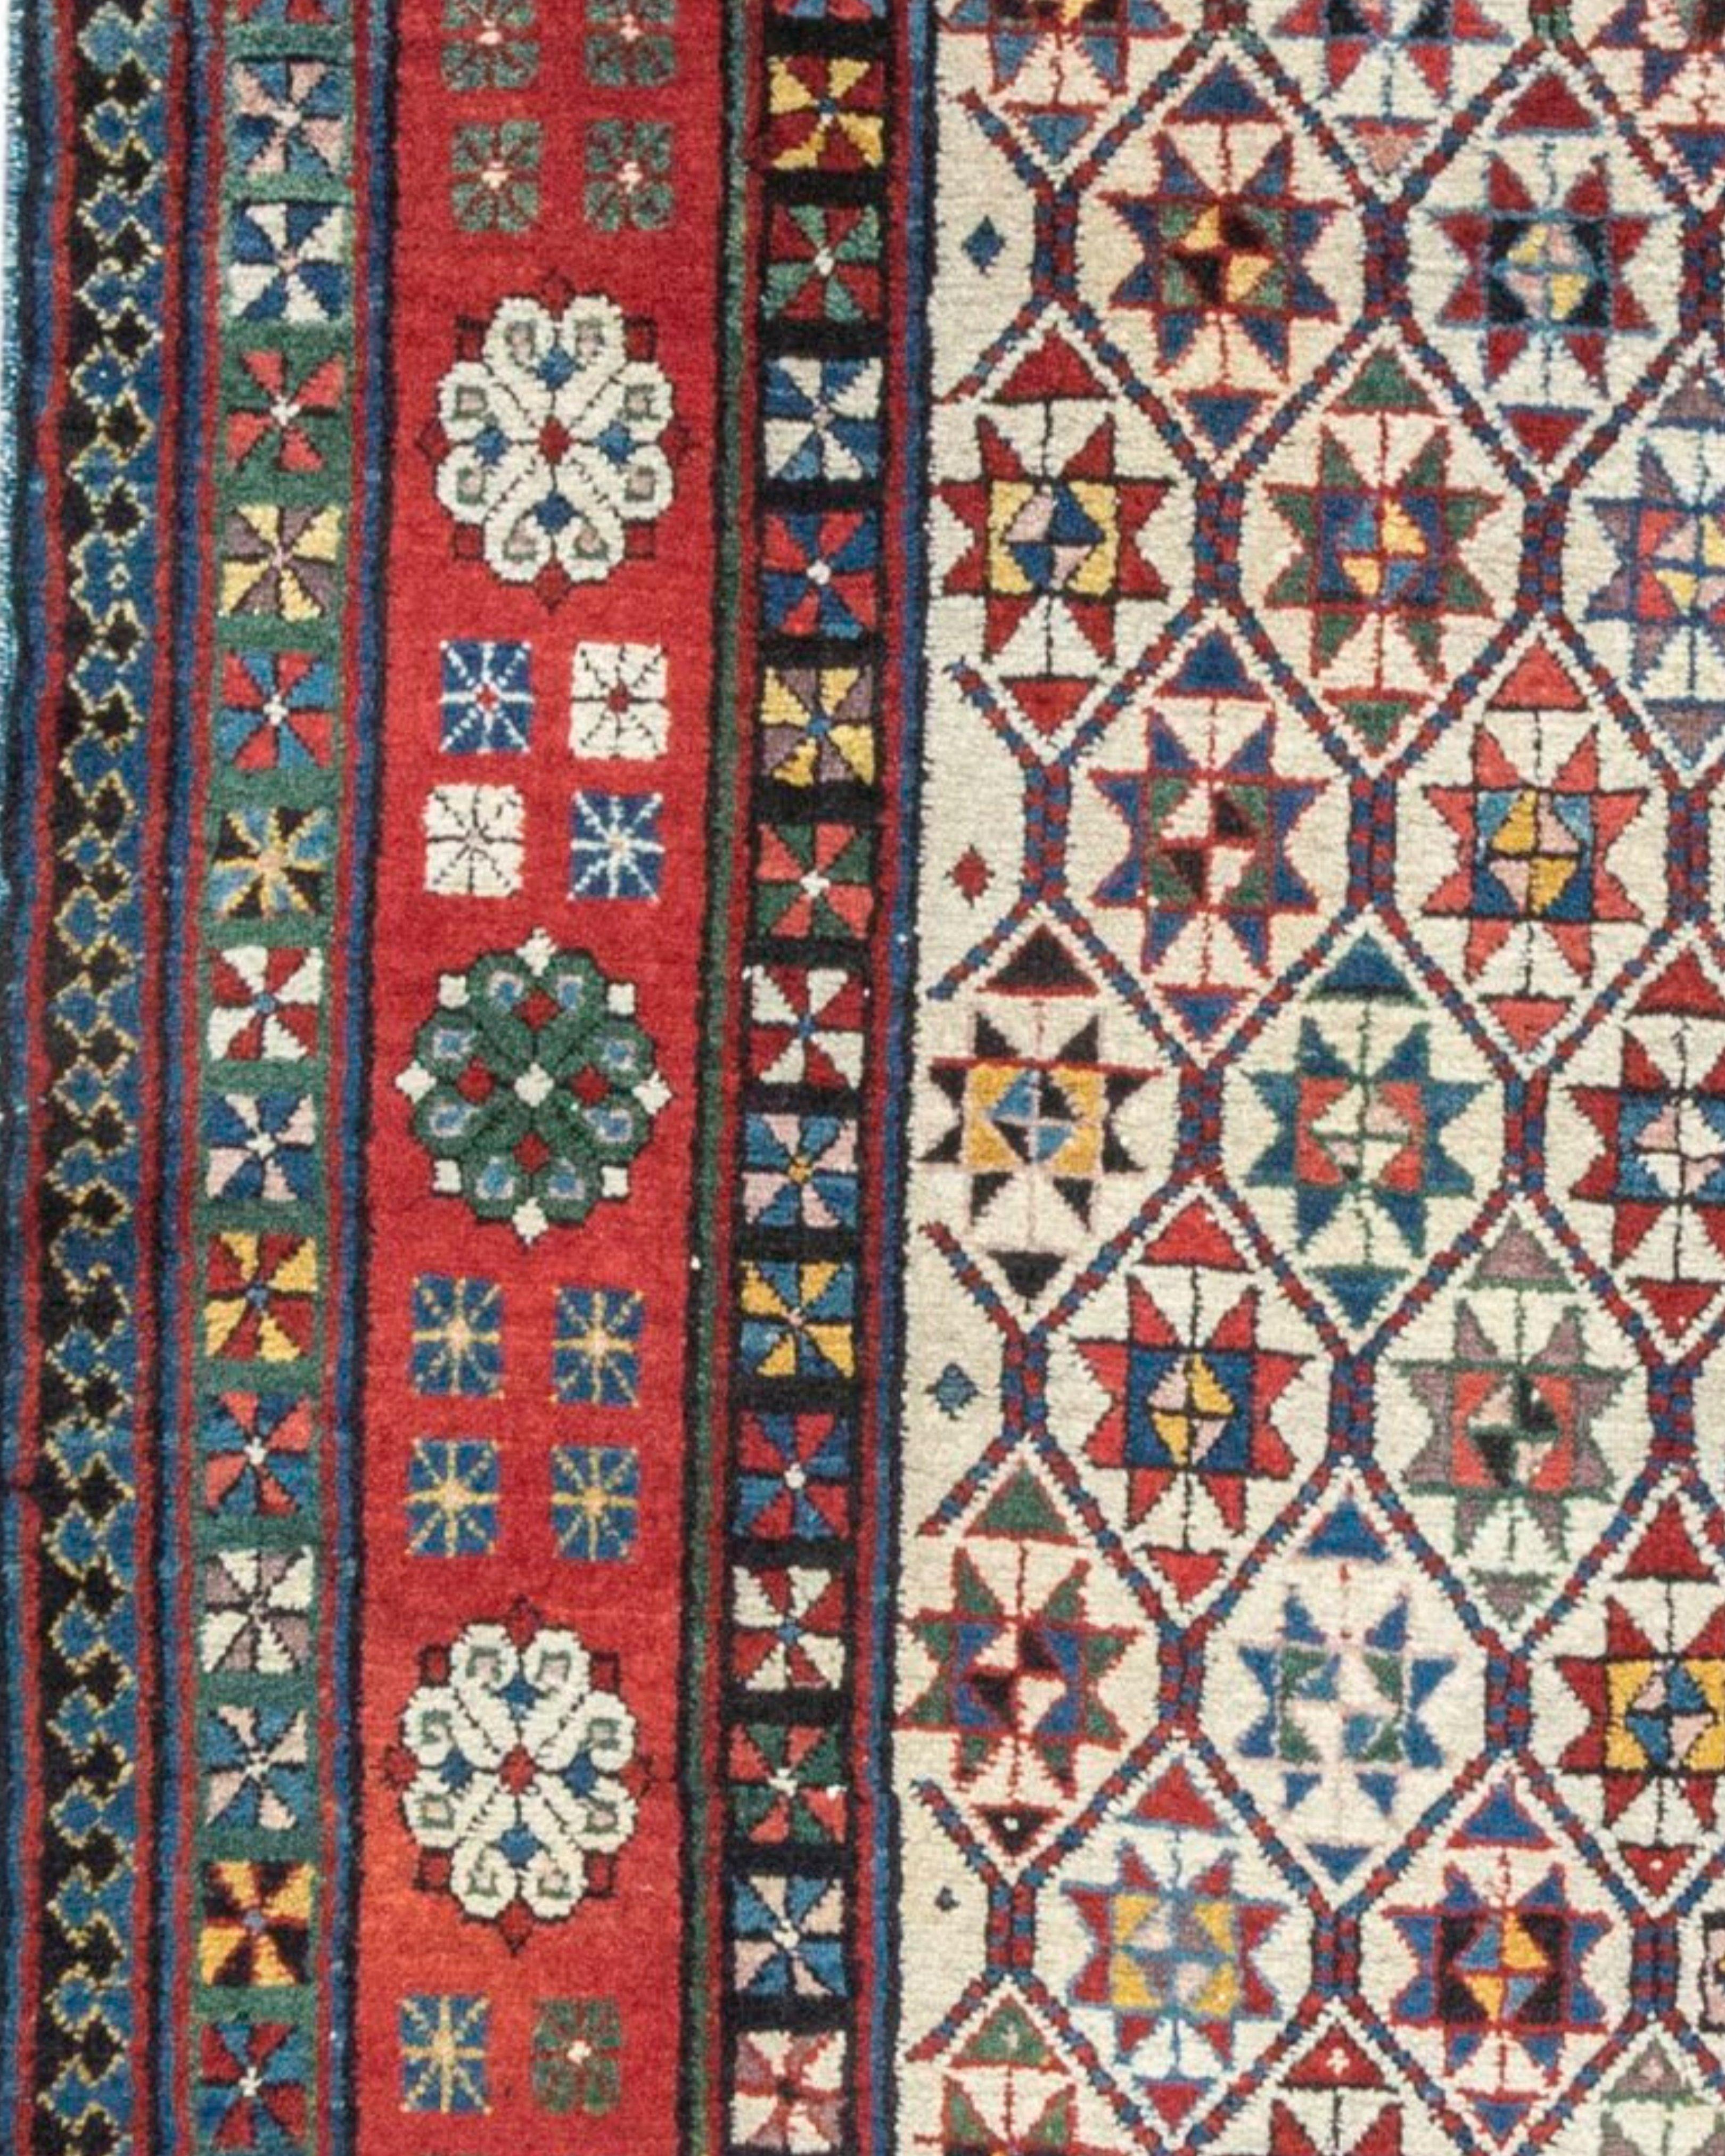 Antique Talish Rug, Late 19th Century

Additional Information:
Dimensions: 3'5